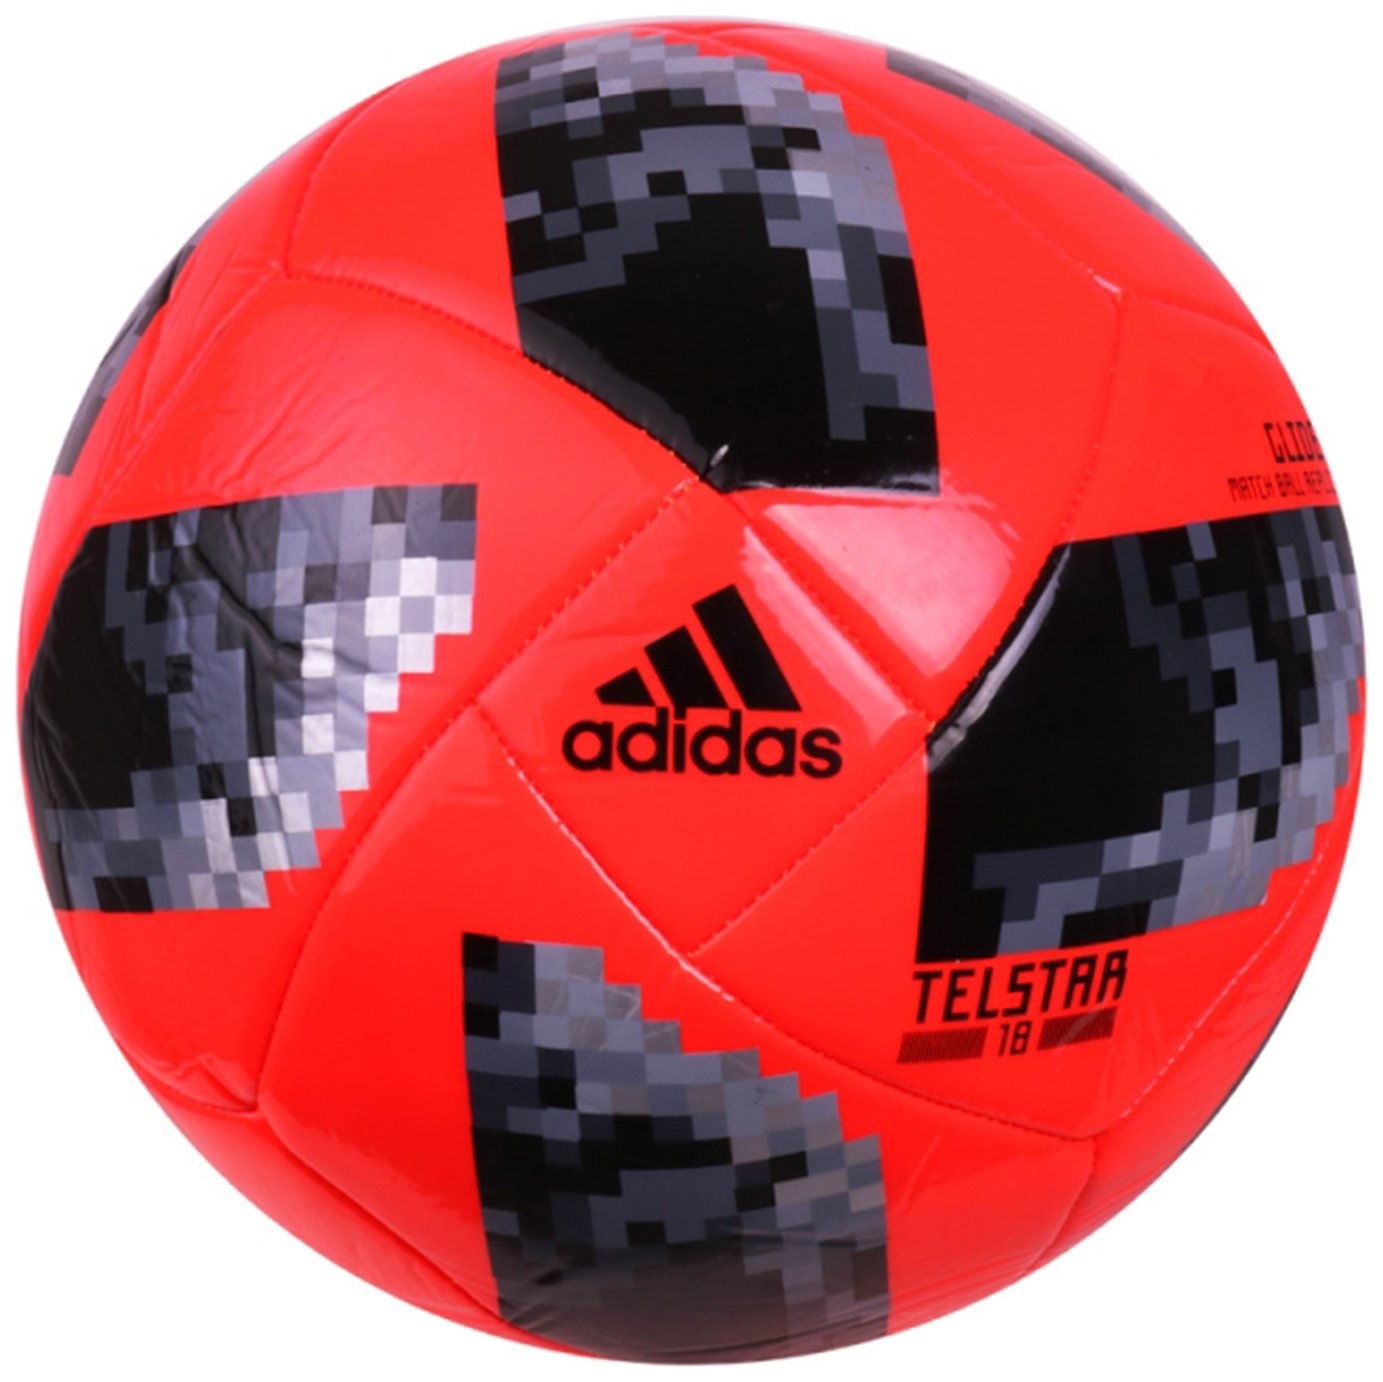 Adidas Official FIFA World Cup Glider Football